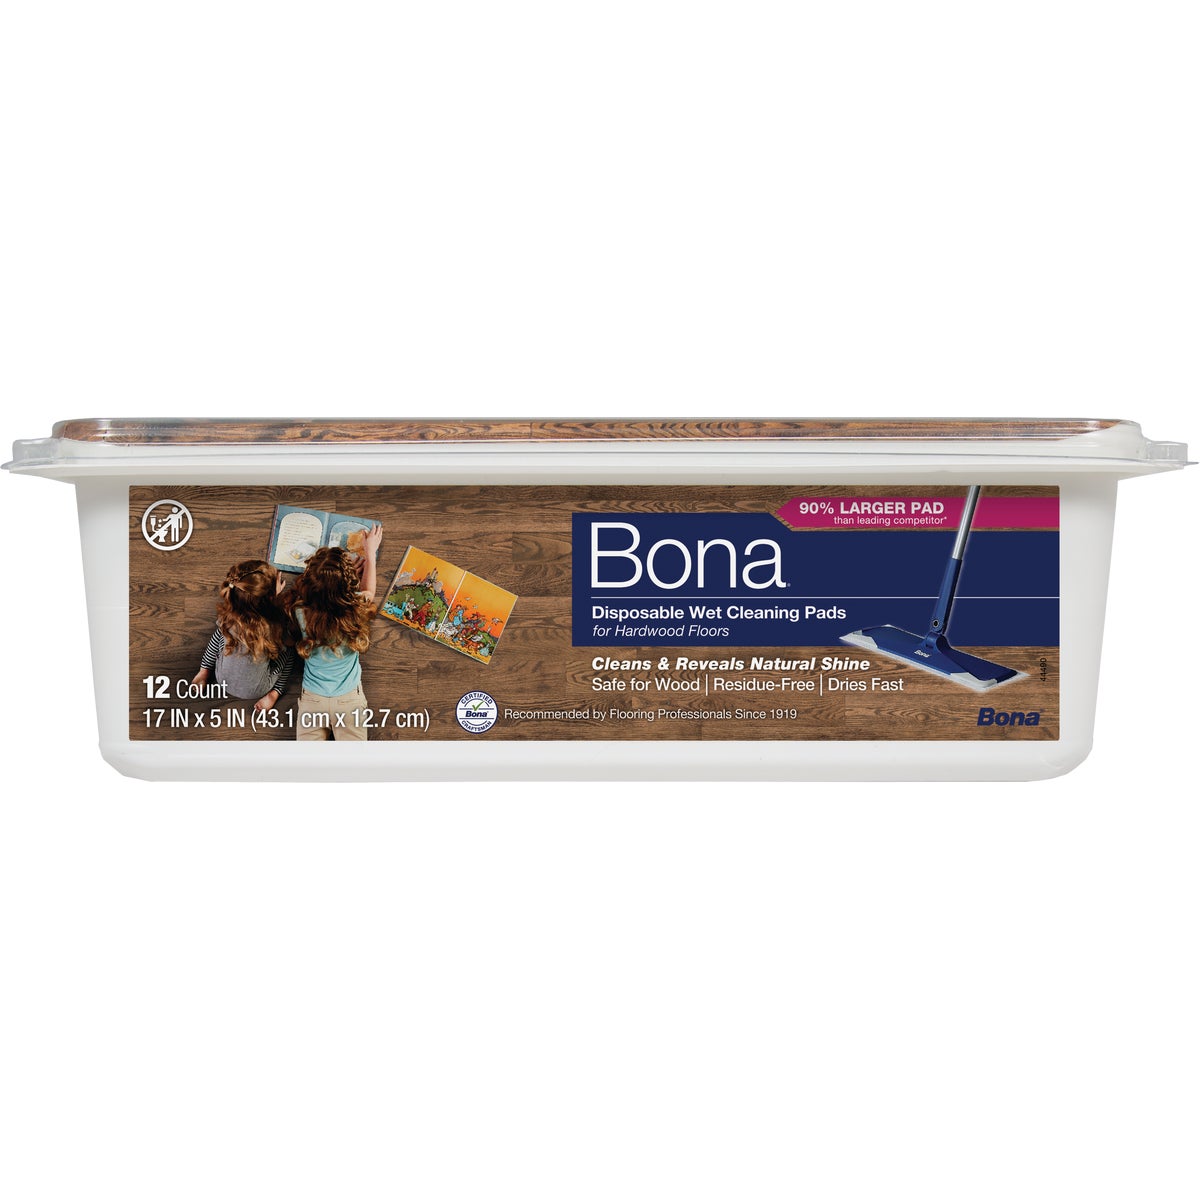 Item 601459, Quick and convenient Bona Hardwood Floor Wet Cleaning Pads are developed 